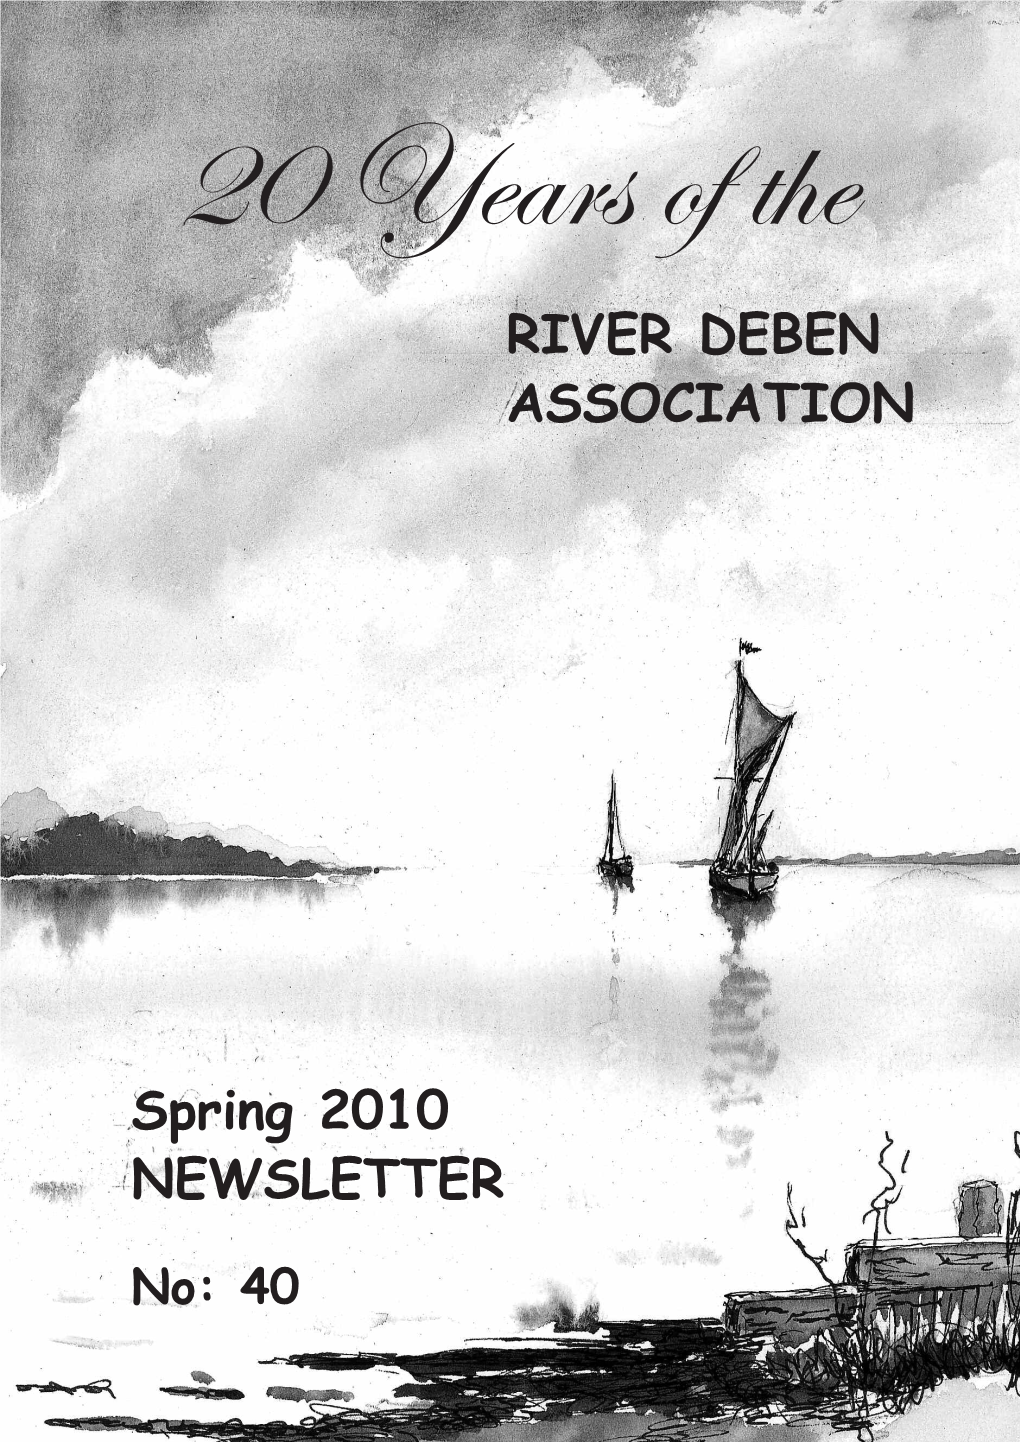 20 Years of the RIVER DEBEN ASSOCIATION